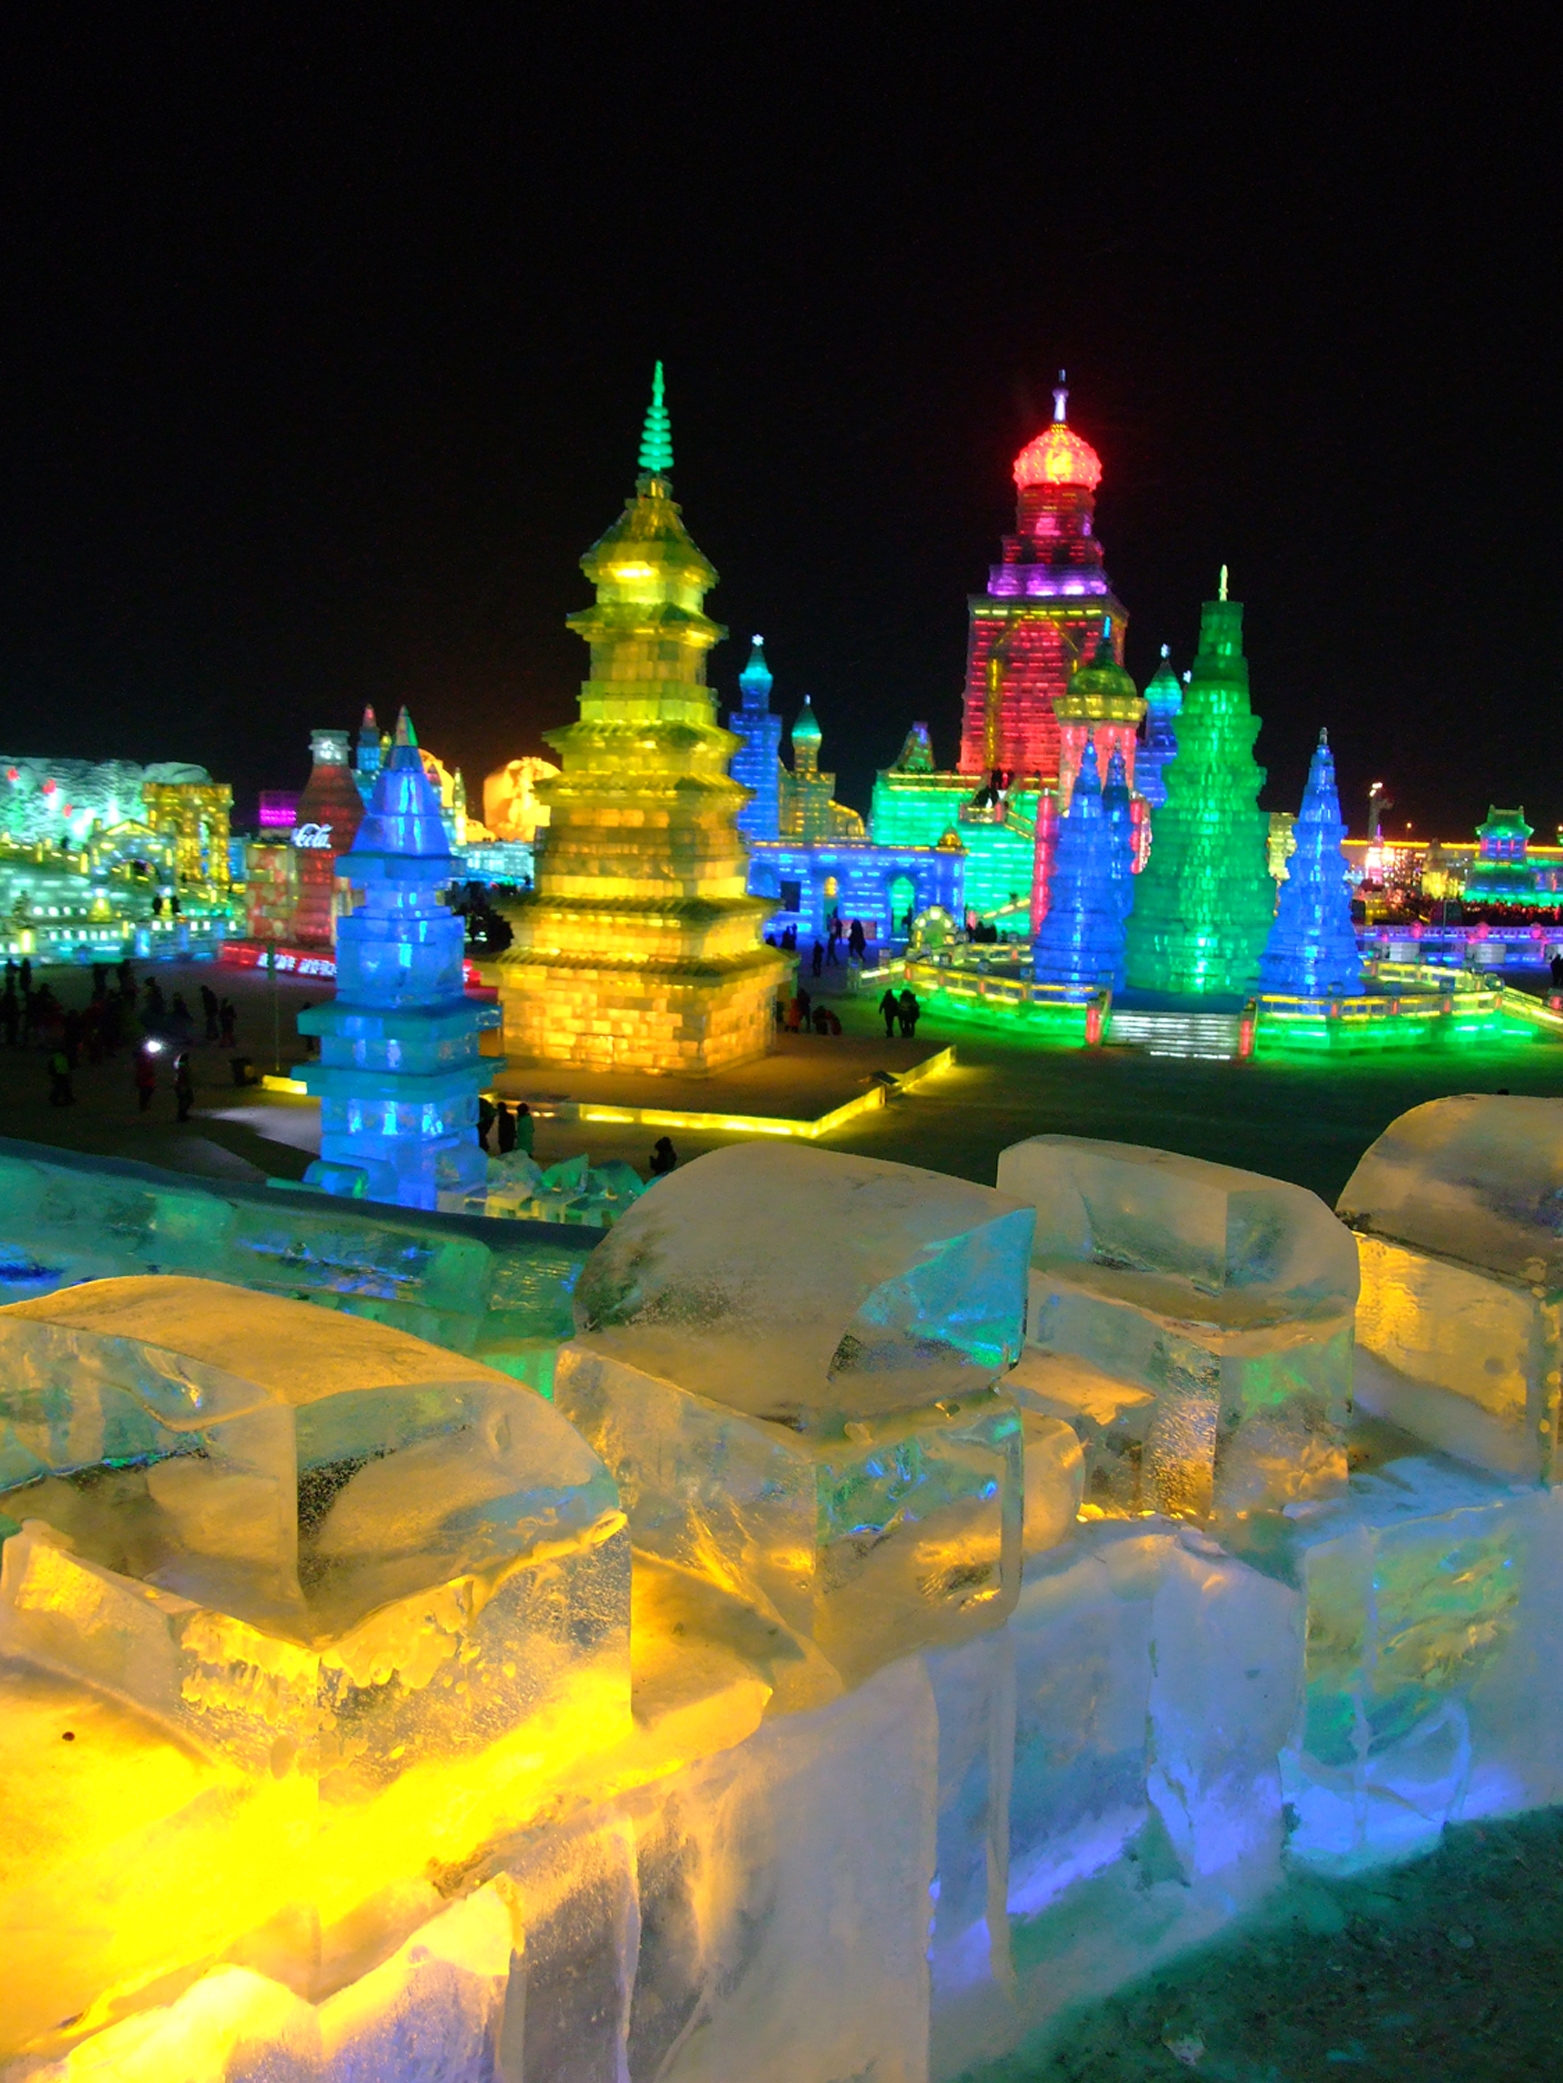 Overlooking The Ice Festival